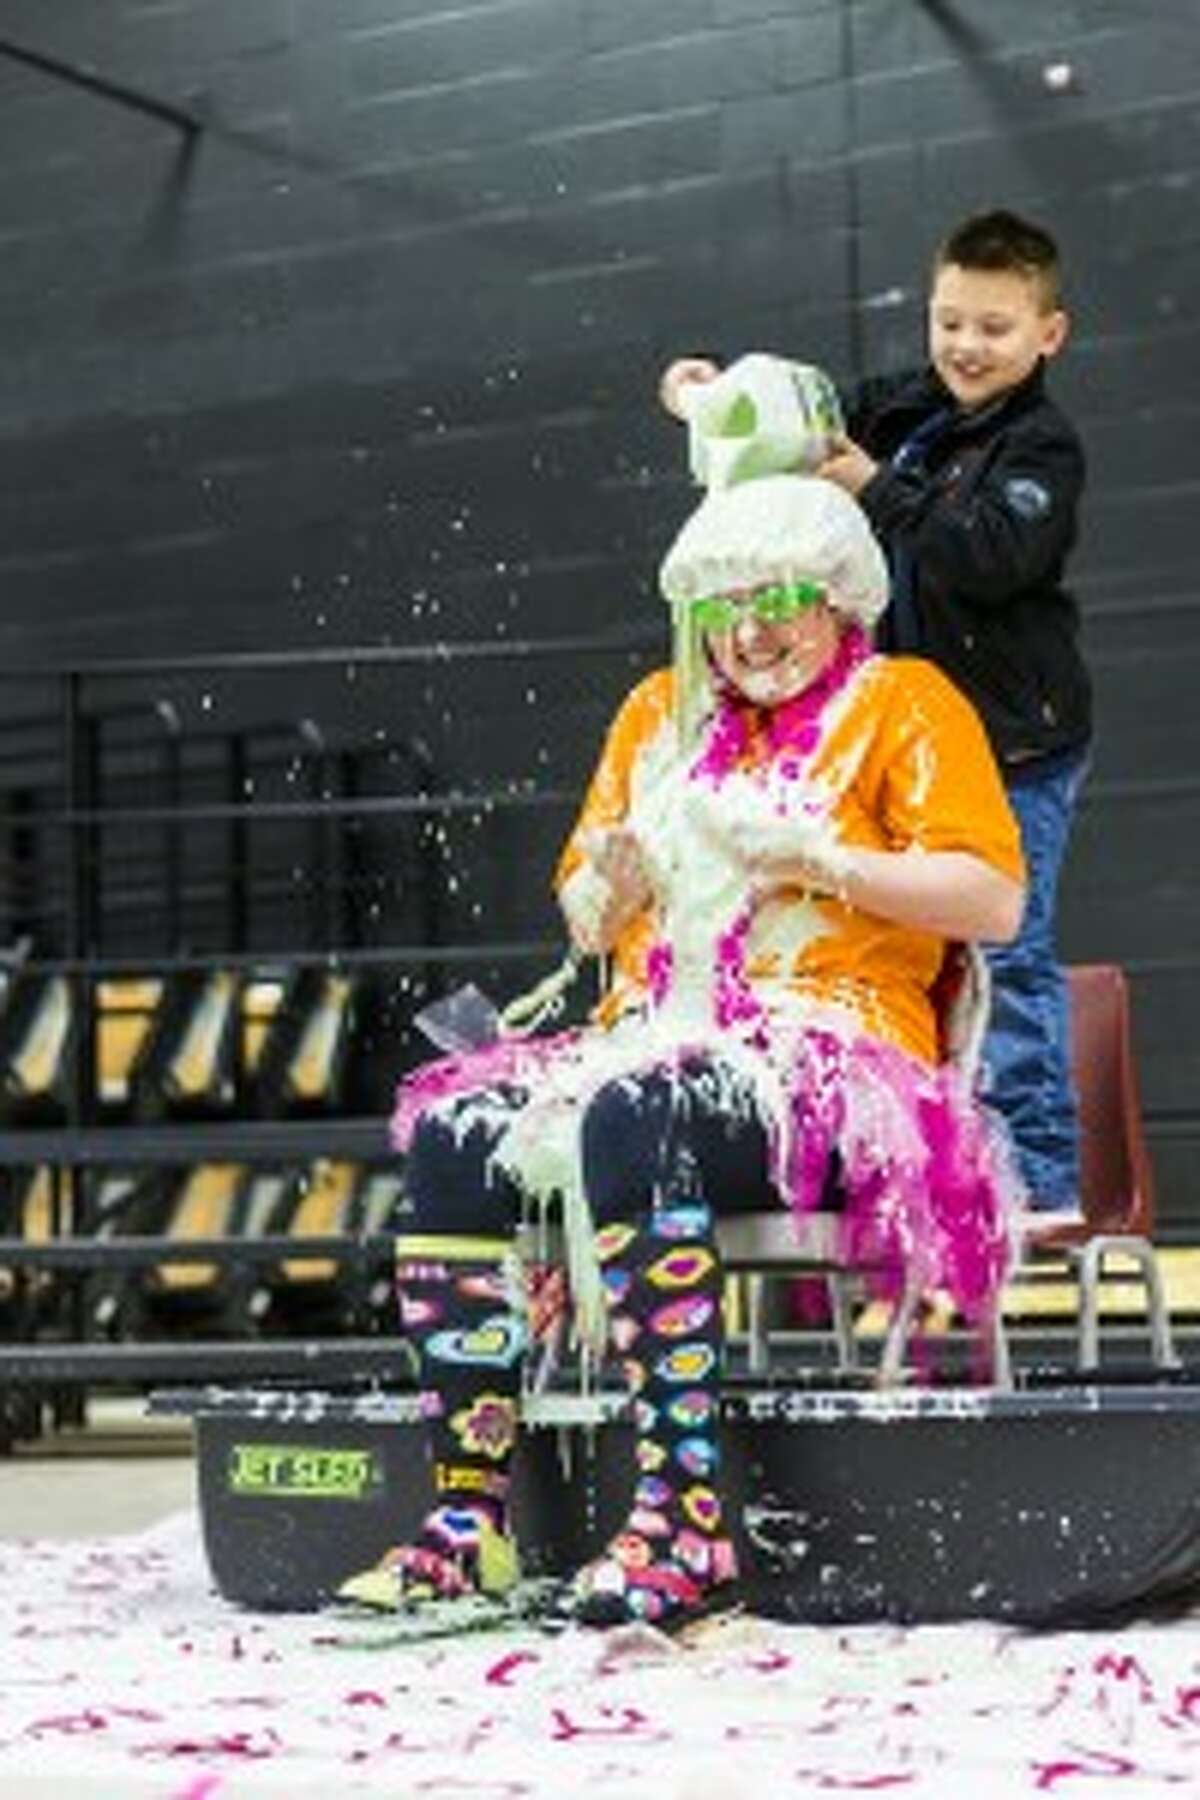 MAKING A MESS: The outfit of teacher Kylene Nix, consisting of a tutu, colorful socks and a bright orange shirt, are doused with slime by Hunter Trelour, a first-grade student.